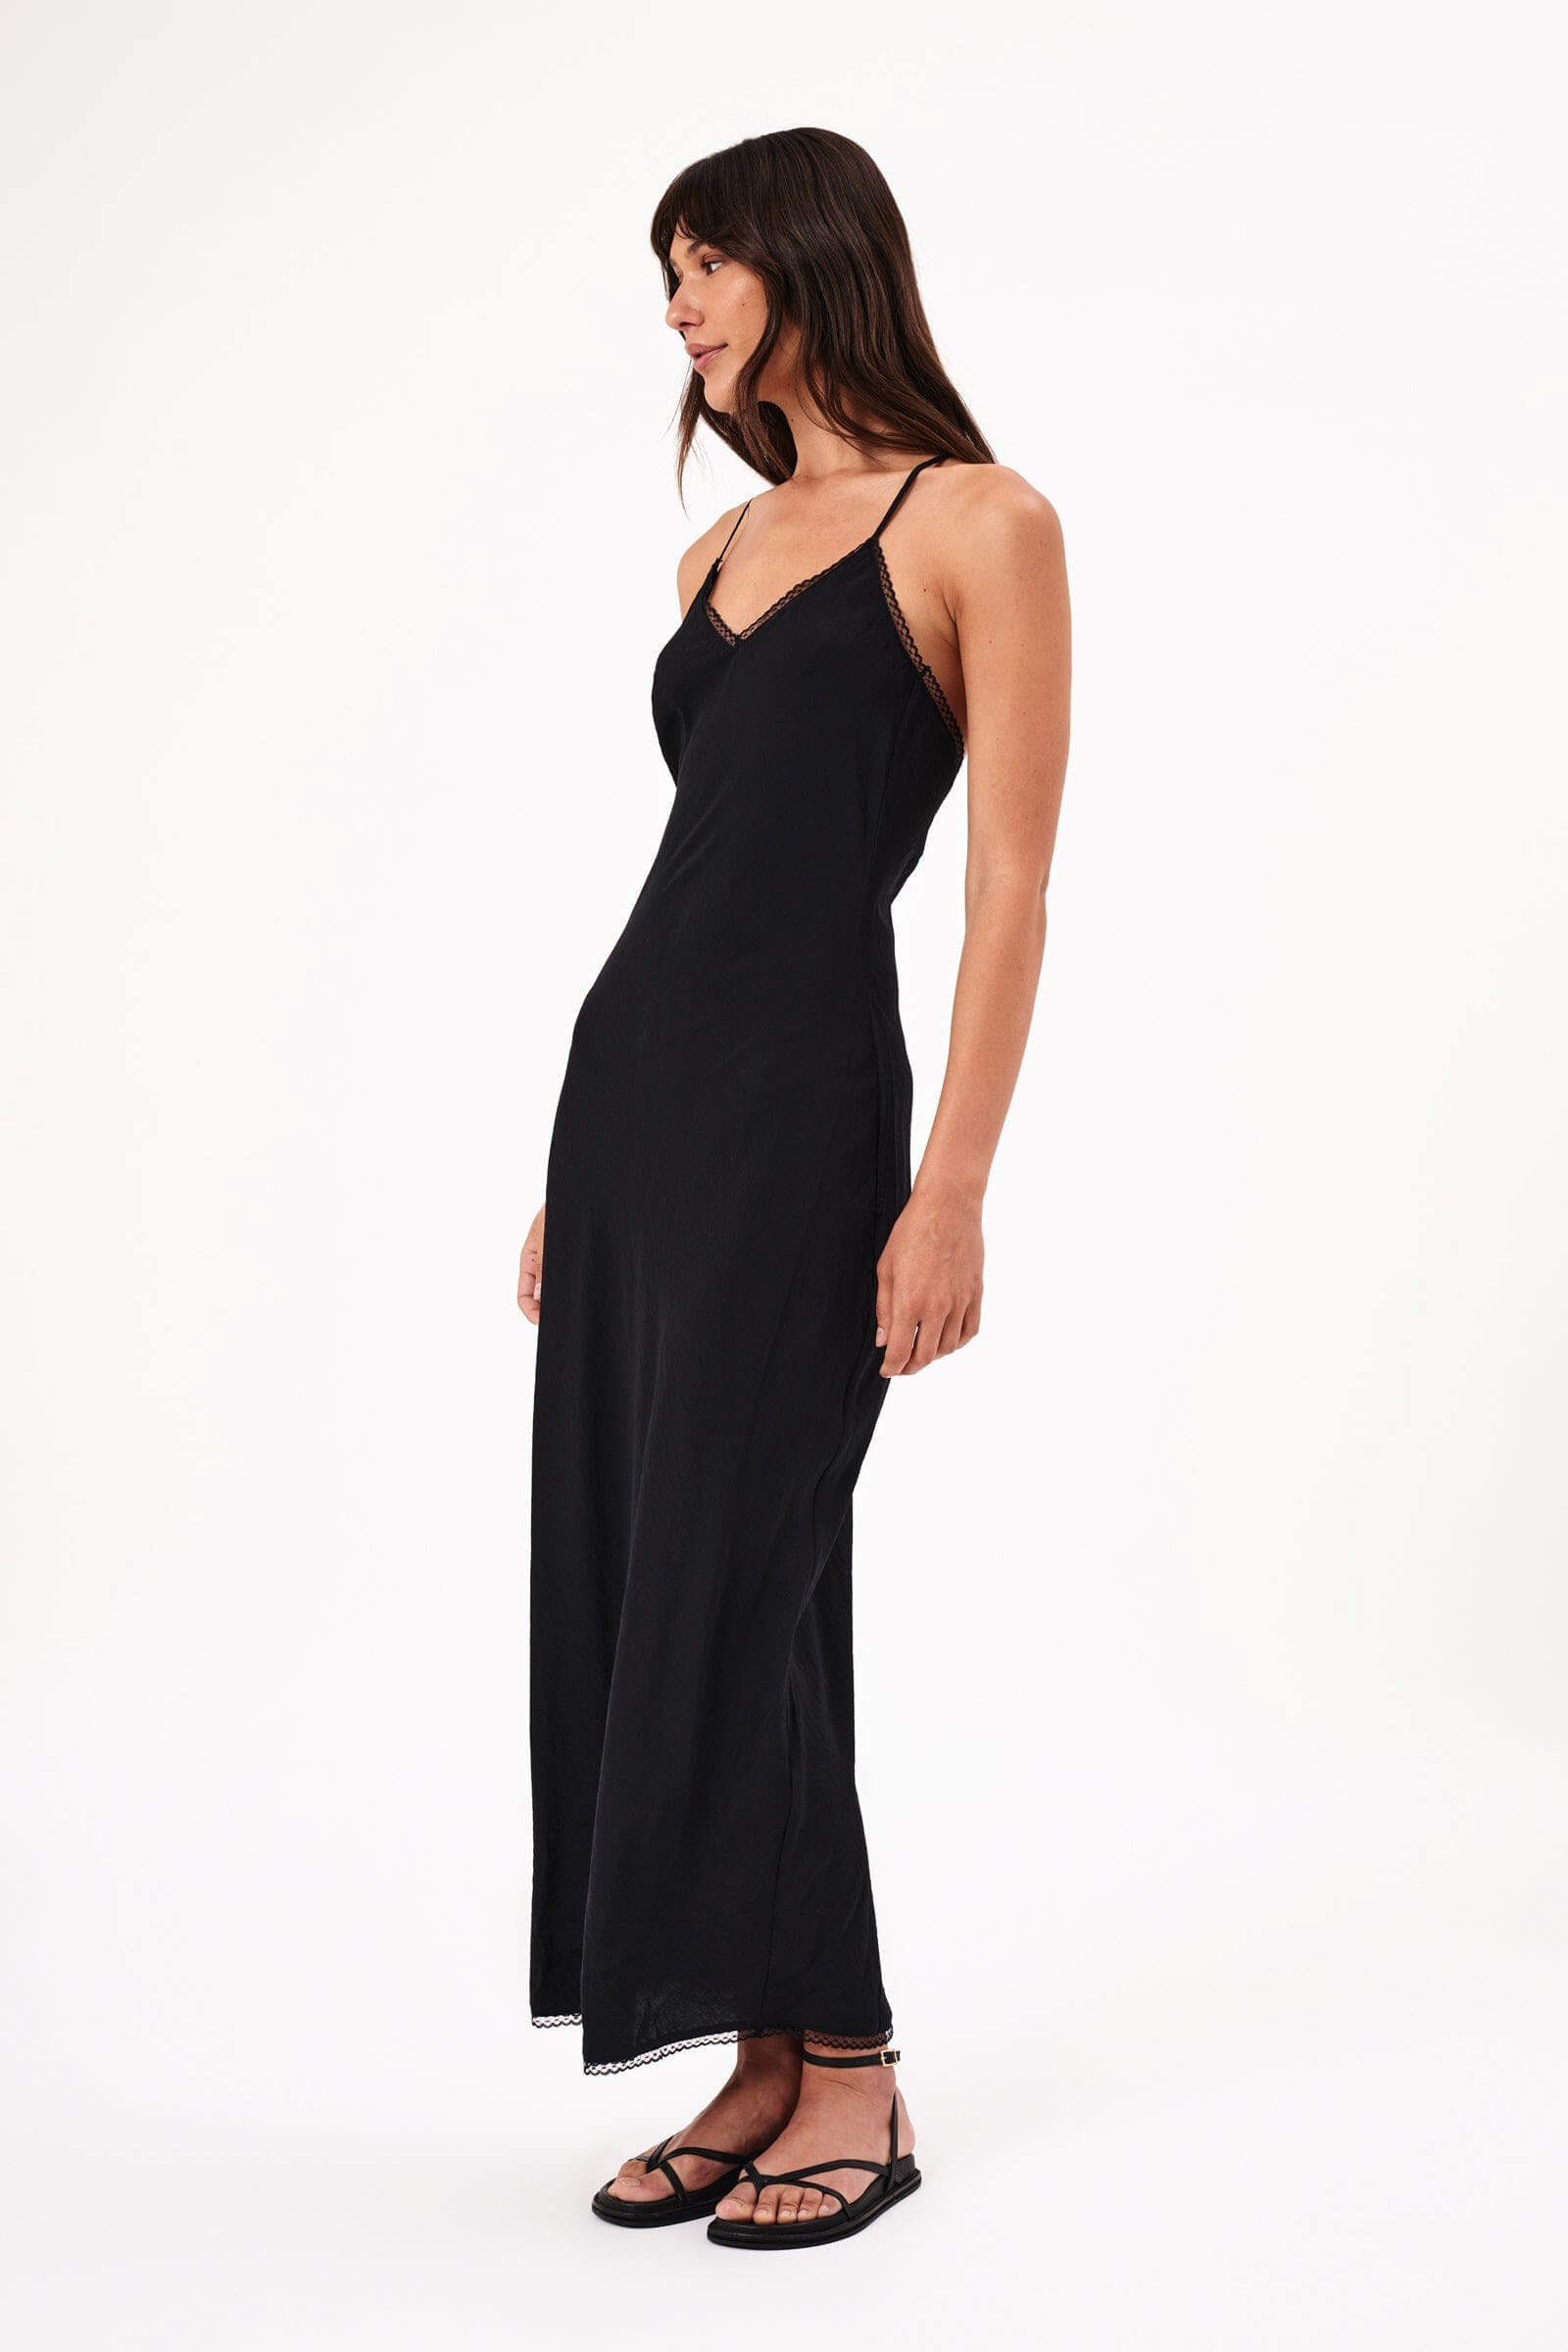 Rolla's Jeans margaux bamboo slip dress in black